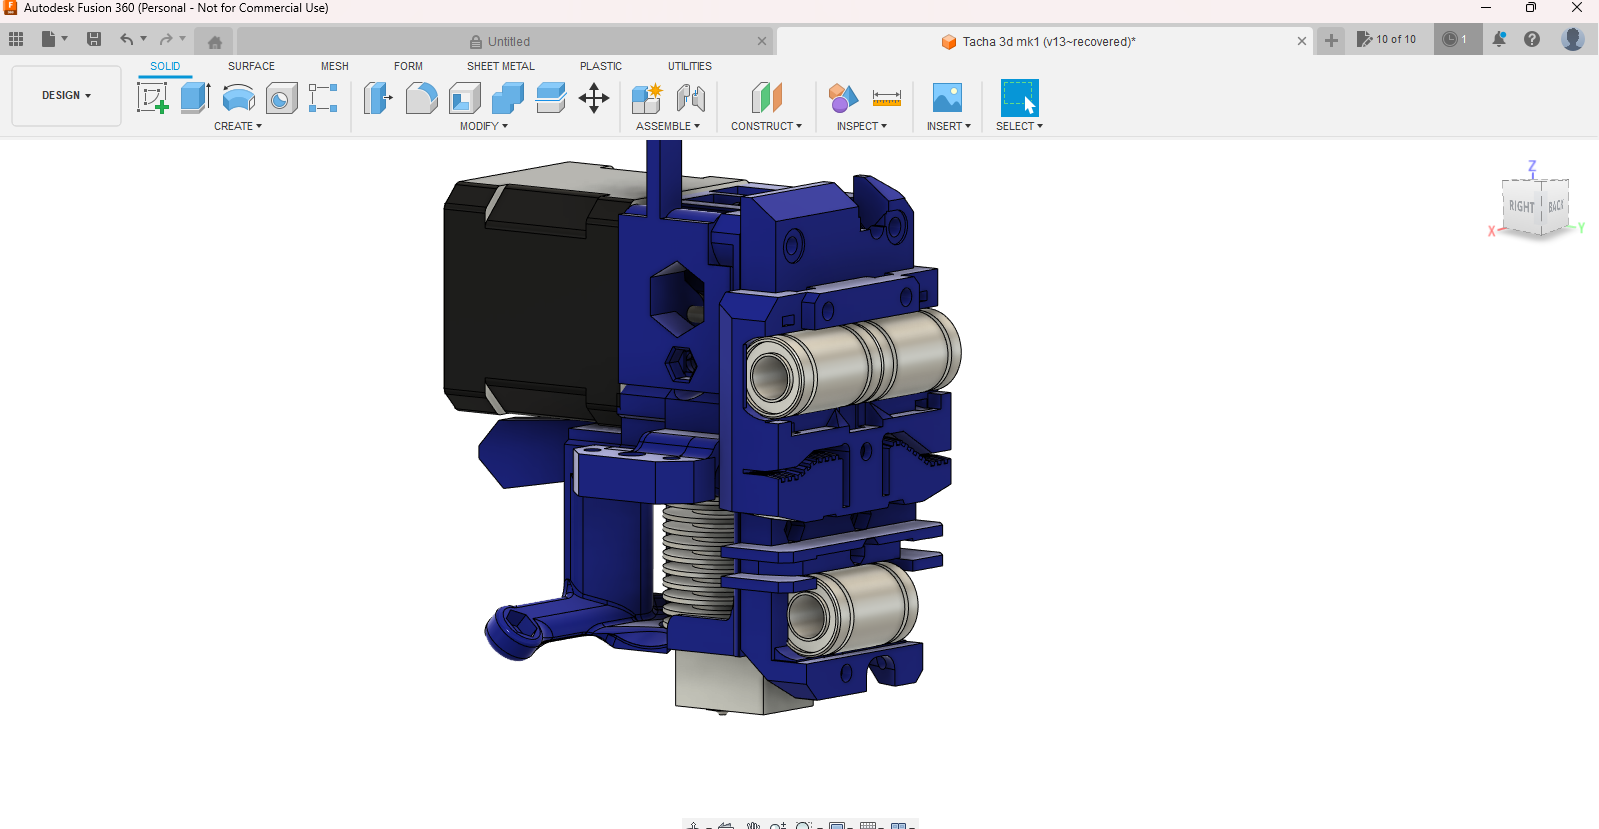 Autodesk Fusion 360 (Personal - Not for Commercial Use) 6_29_2023 10_08_48 PM.png